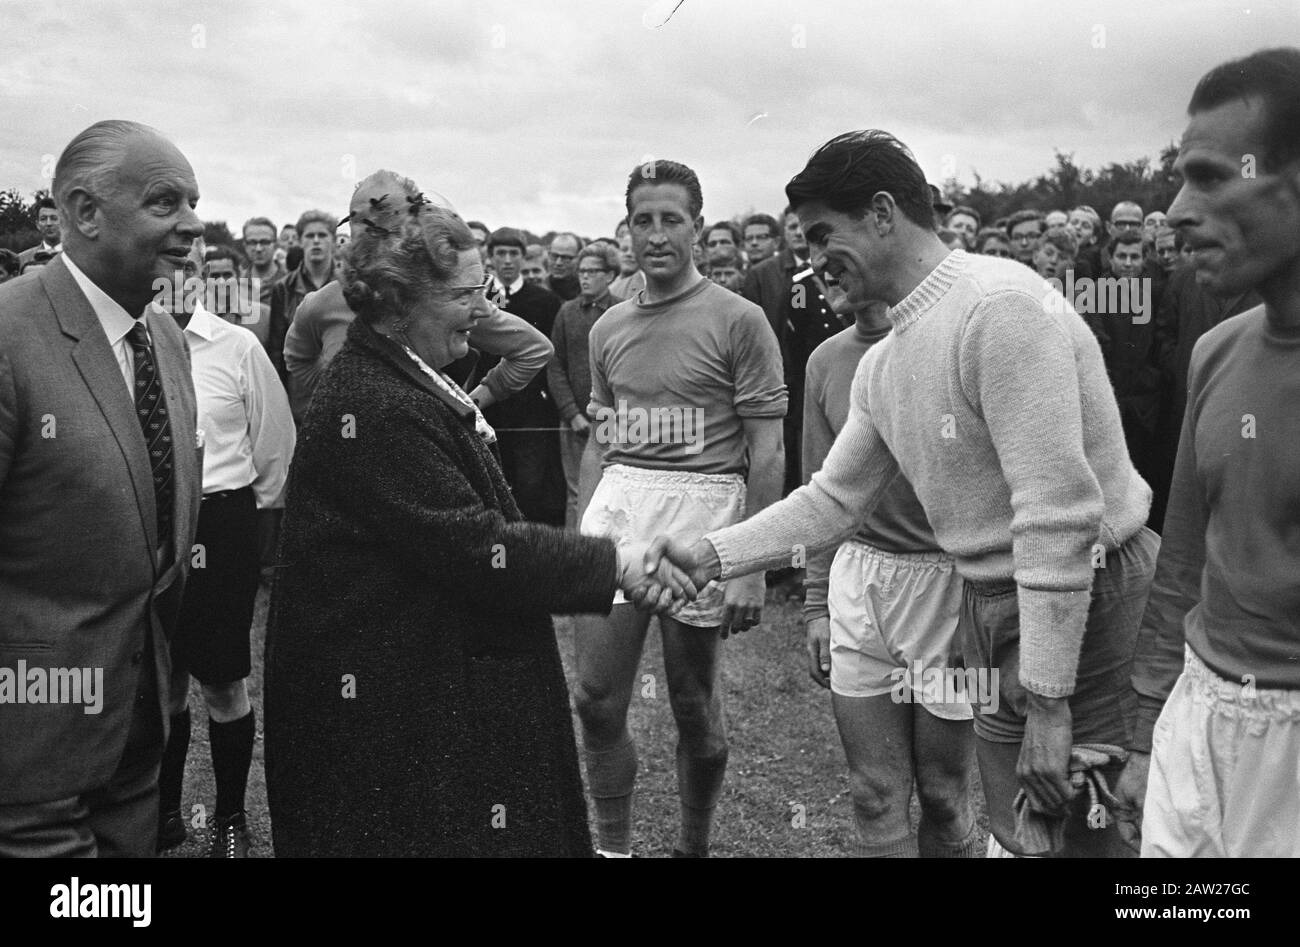 Queen Juliana is presented to keeper Frans de Munck Annotation: Traditional contest between former internationals and an amateur team in the fields of vv. Royal Palace Soestdijk Date: July 8, 1965 Location: Baarn Soestdijk Keywords: queens, sport, soccer, sports Person Name: Juliana (queen Netherlands), Munck, French Stock Photo